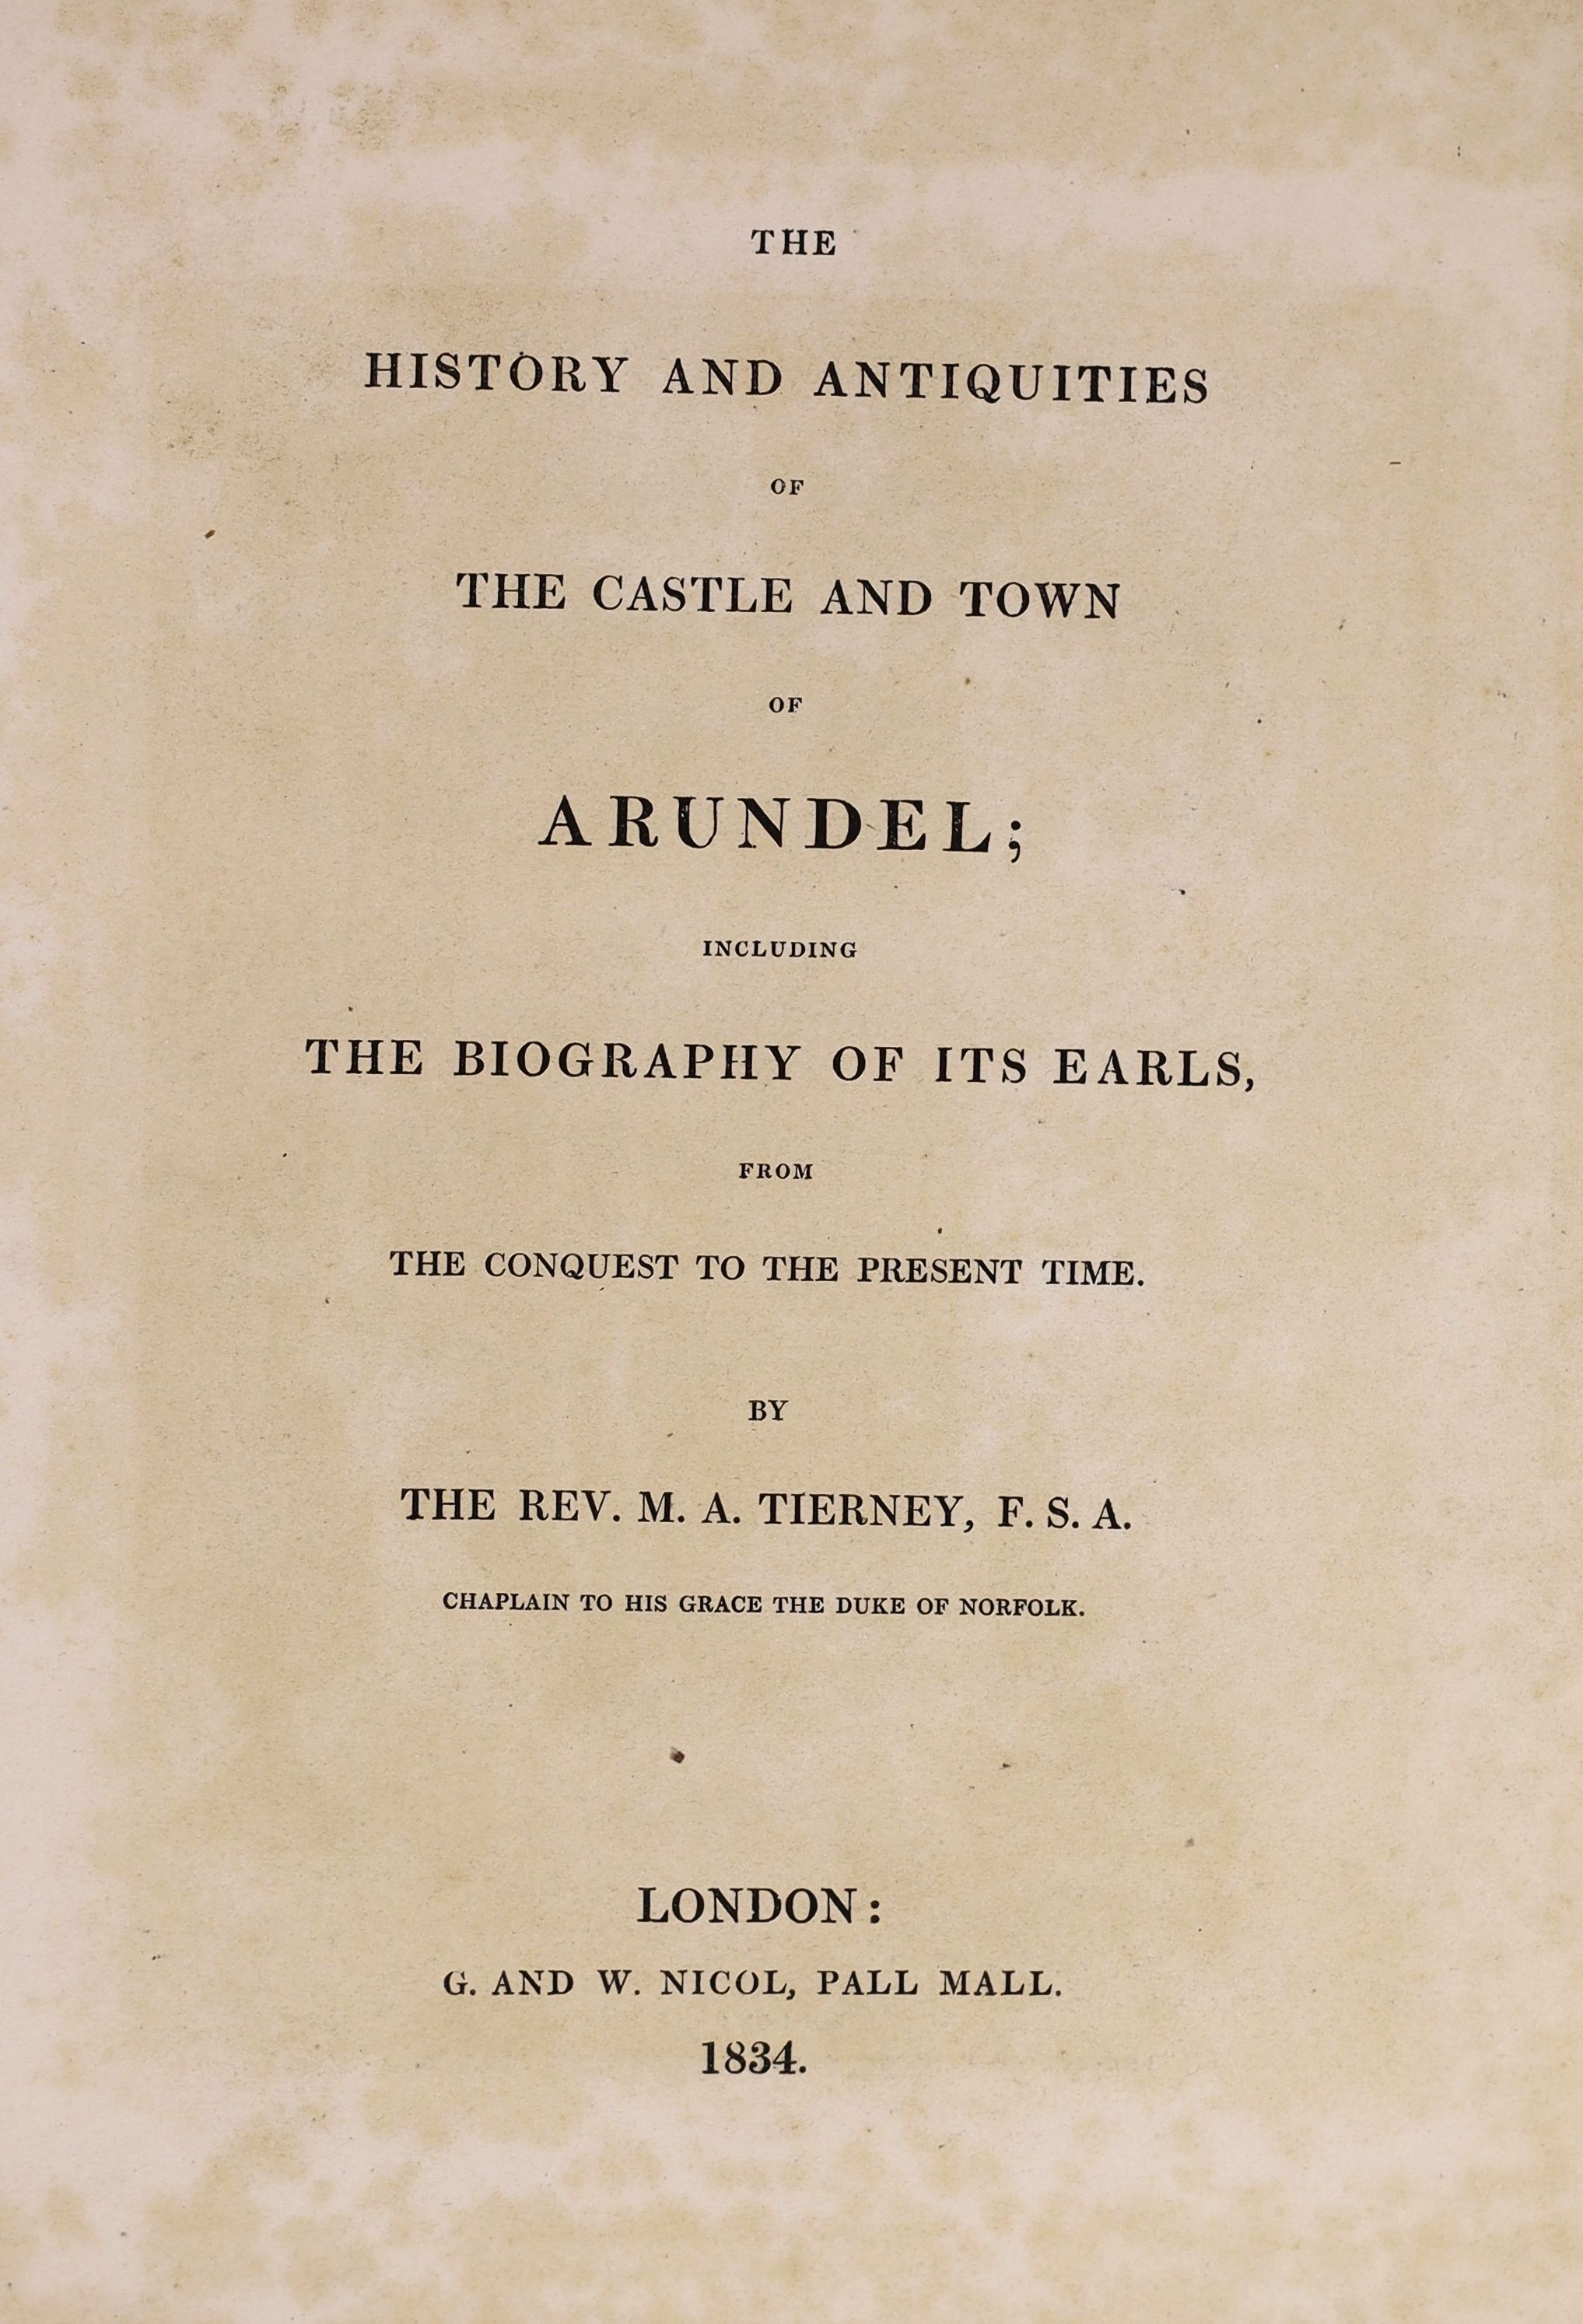 Tierney, M.A. The History and Antiquities of the Castle and Town of Arundel, 2 volumes bound in one, first edition, large paper copy (280 x 207mm.), 8 engraved plates on india paper (some spotting), engraved illustration